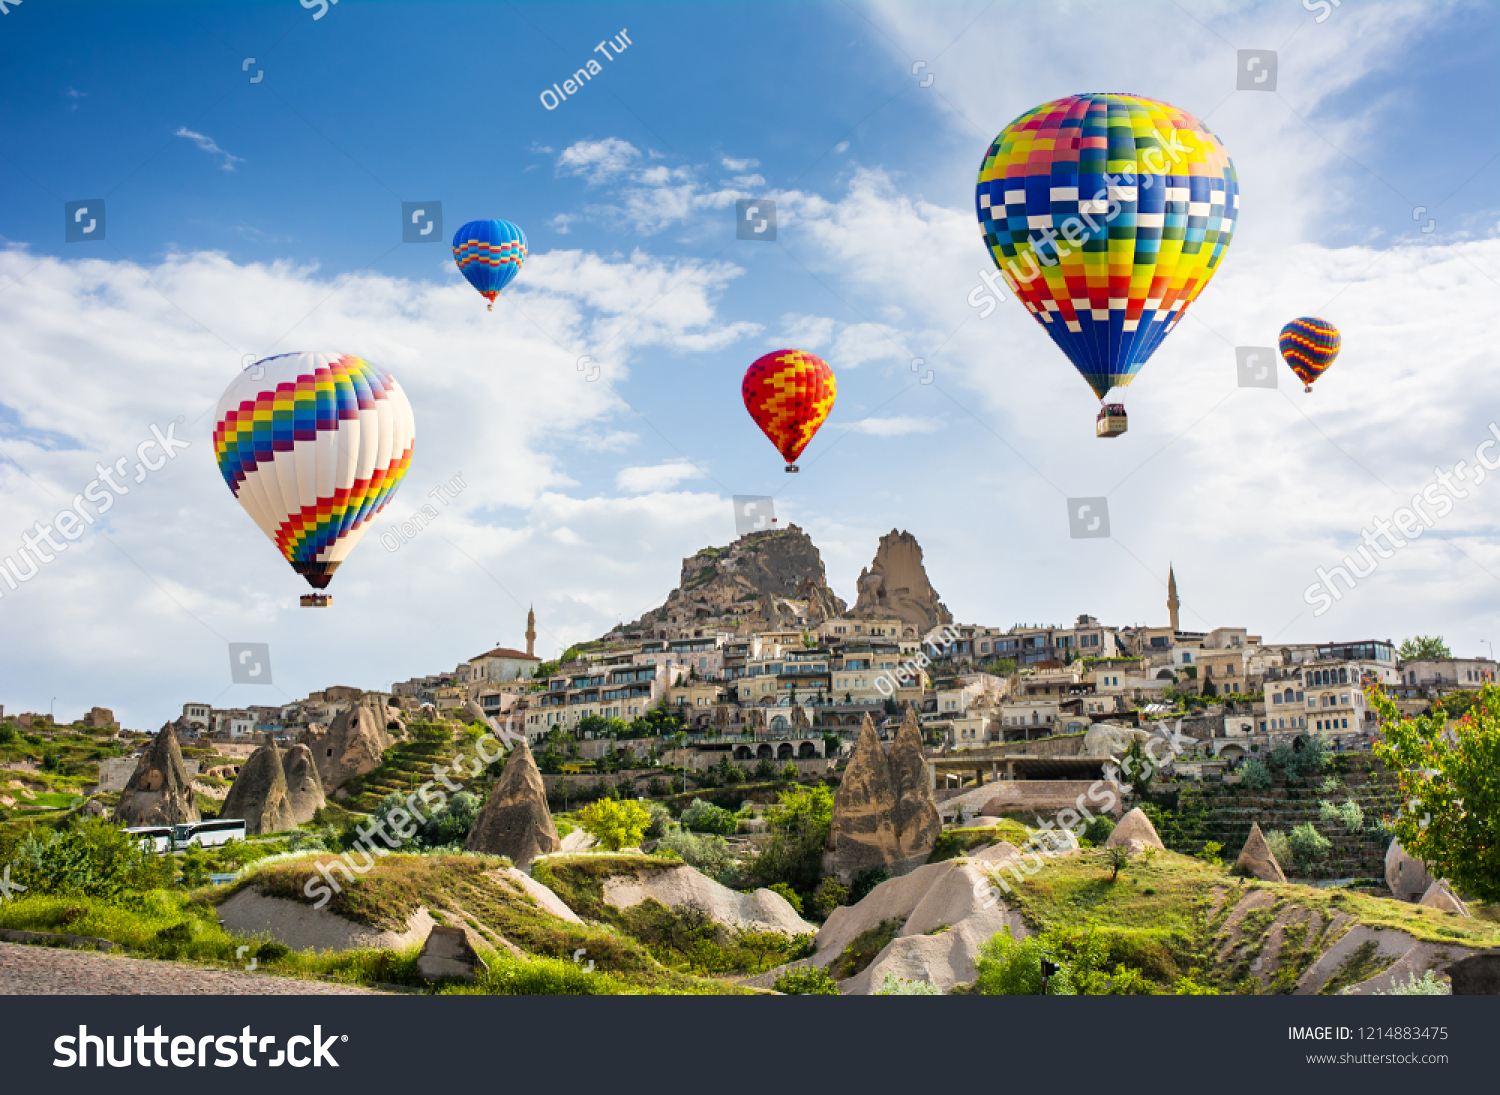 The great tourist attraction of Cappadocia - balloon flight. Cappadocia is known around the world as one of the best places to fly with hot air balloons. Goreme, Cappadocia, Turkey #1214883475